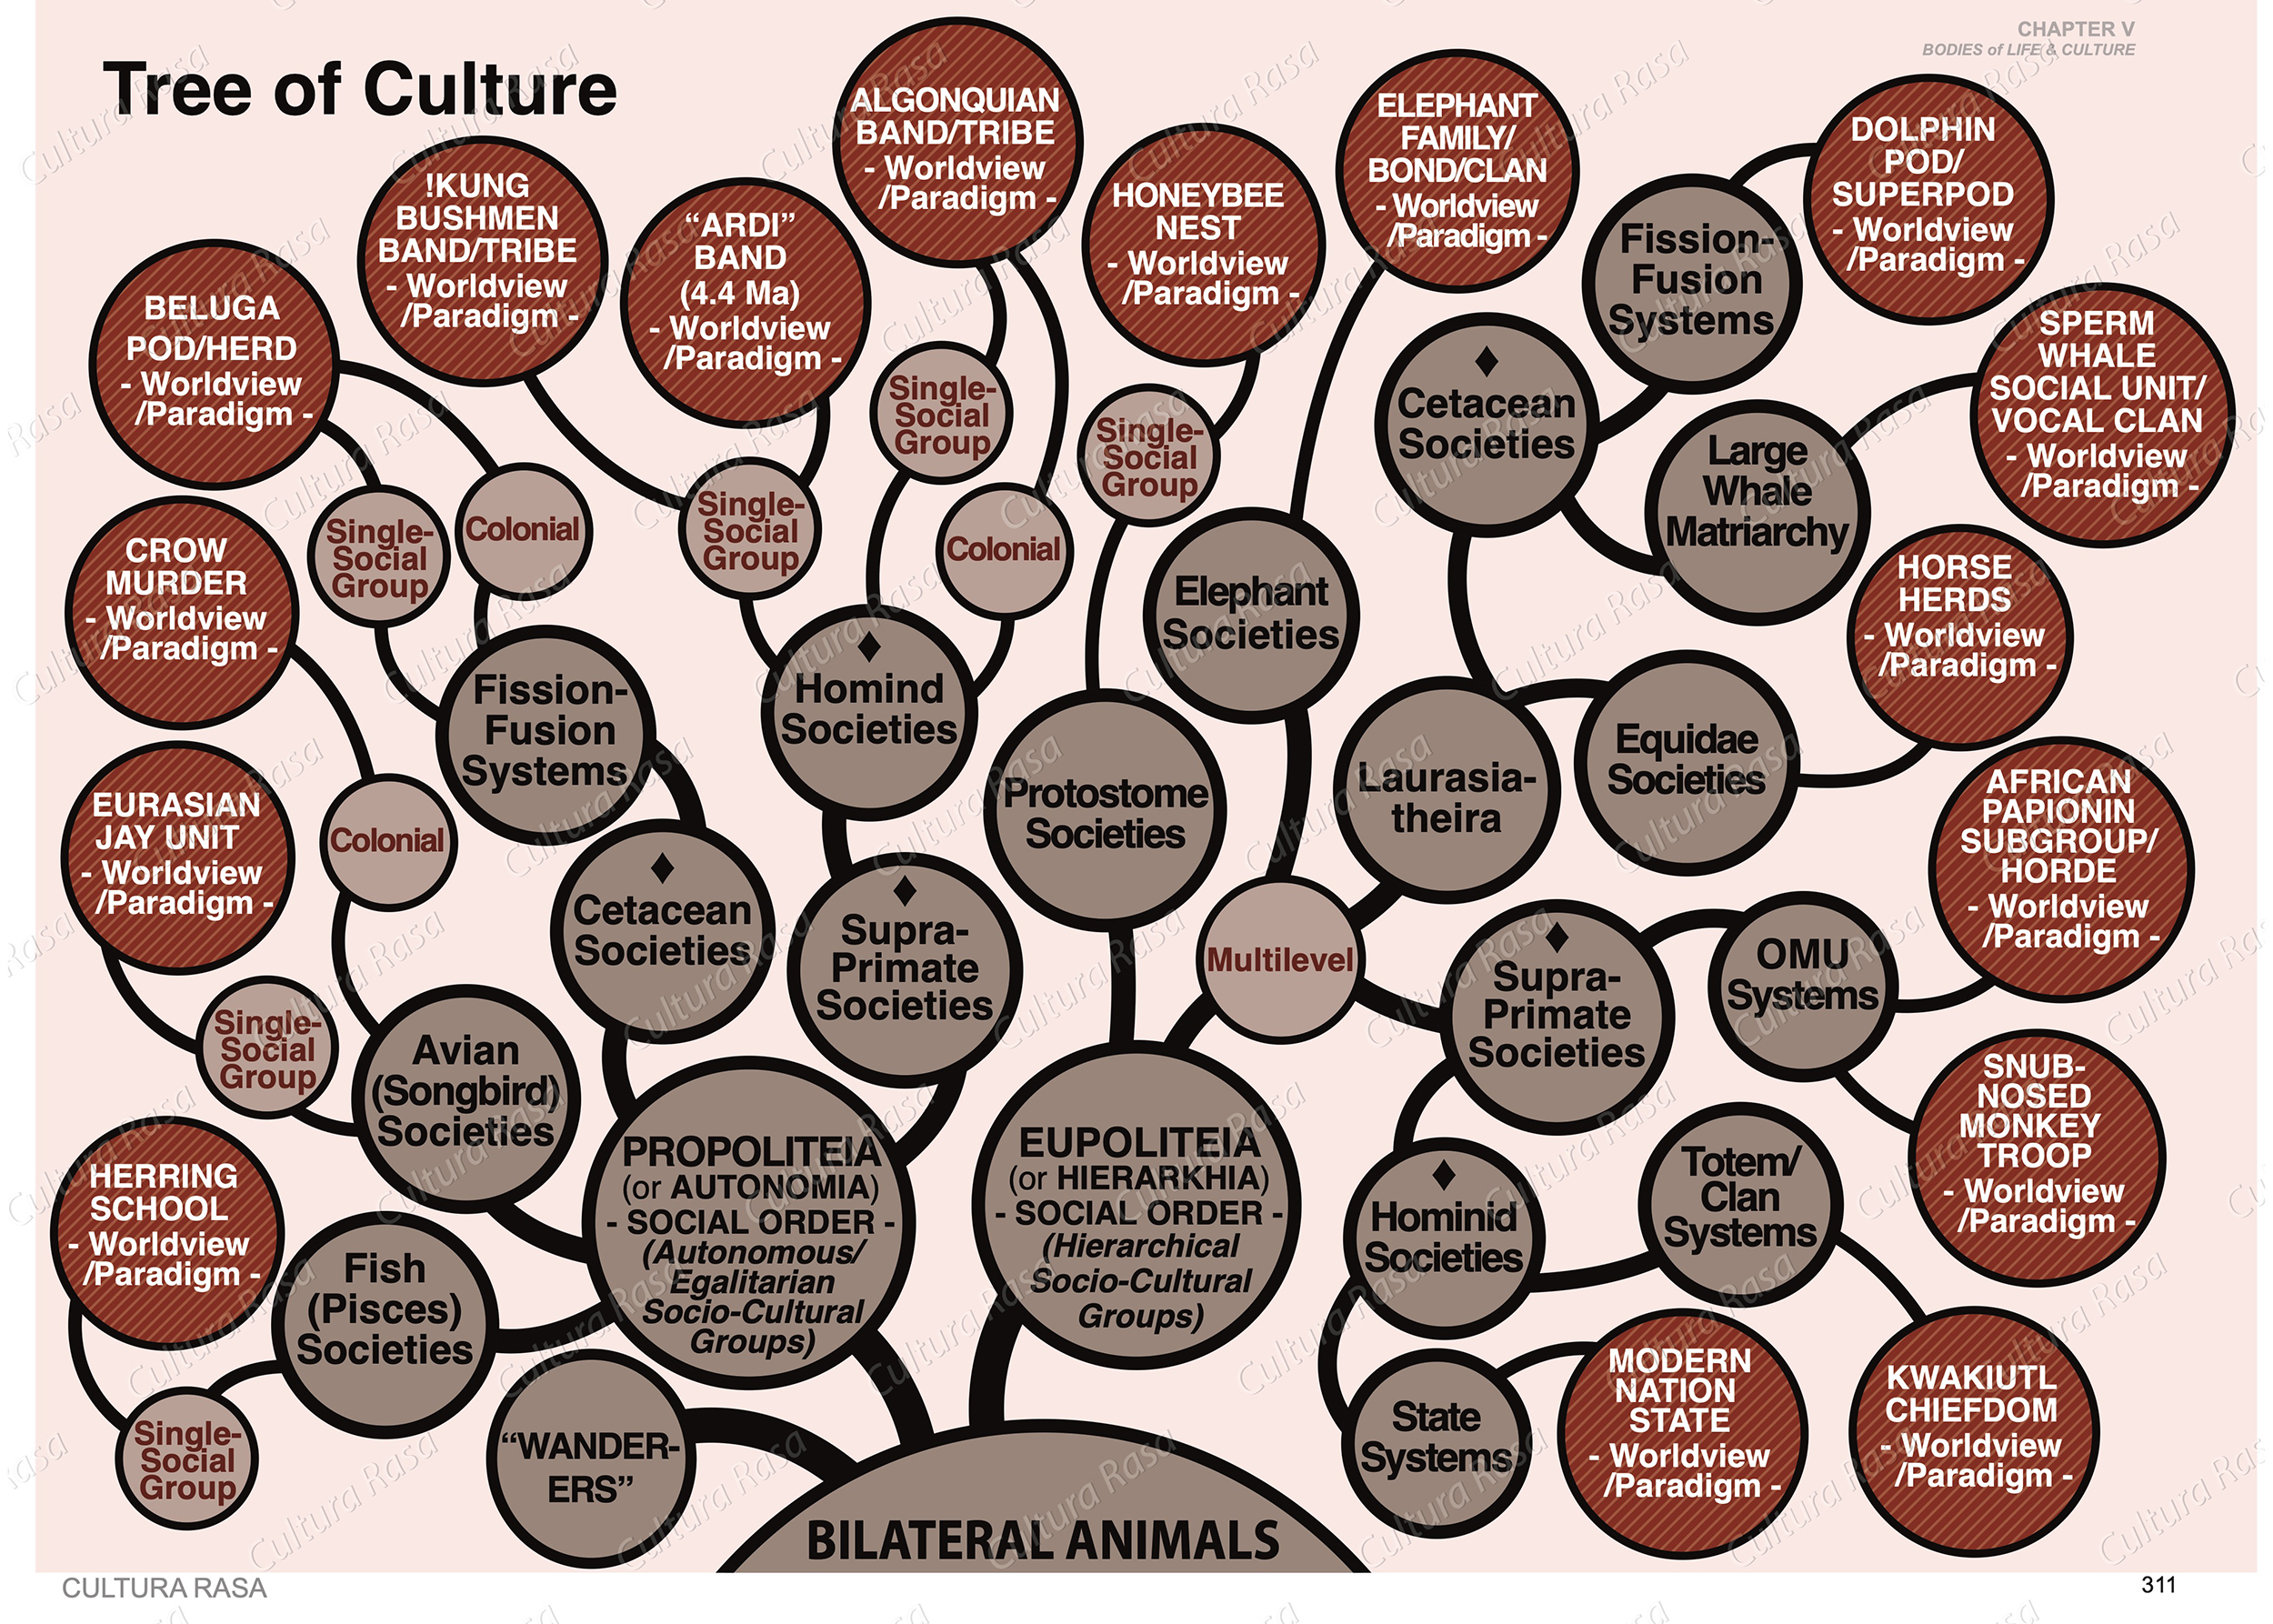 Classification of cultural systems based on their social organization.